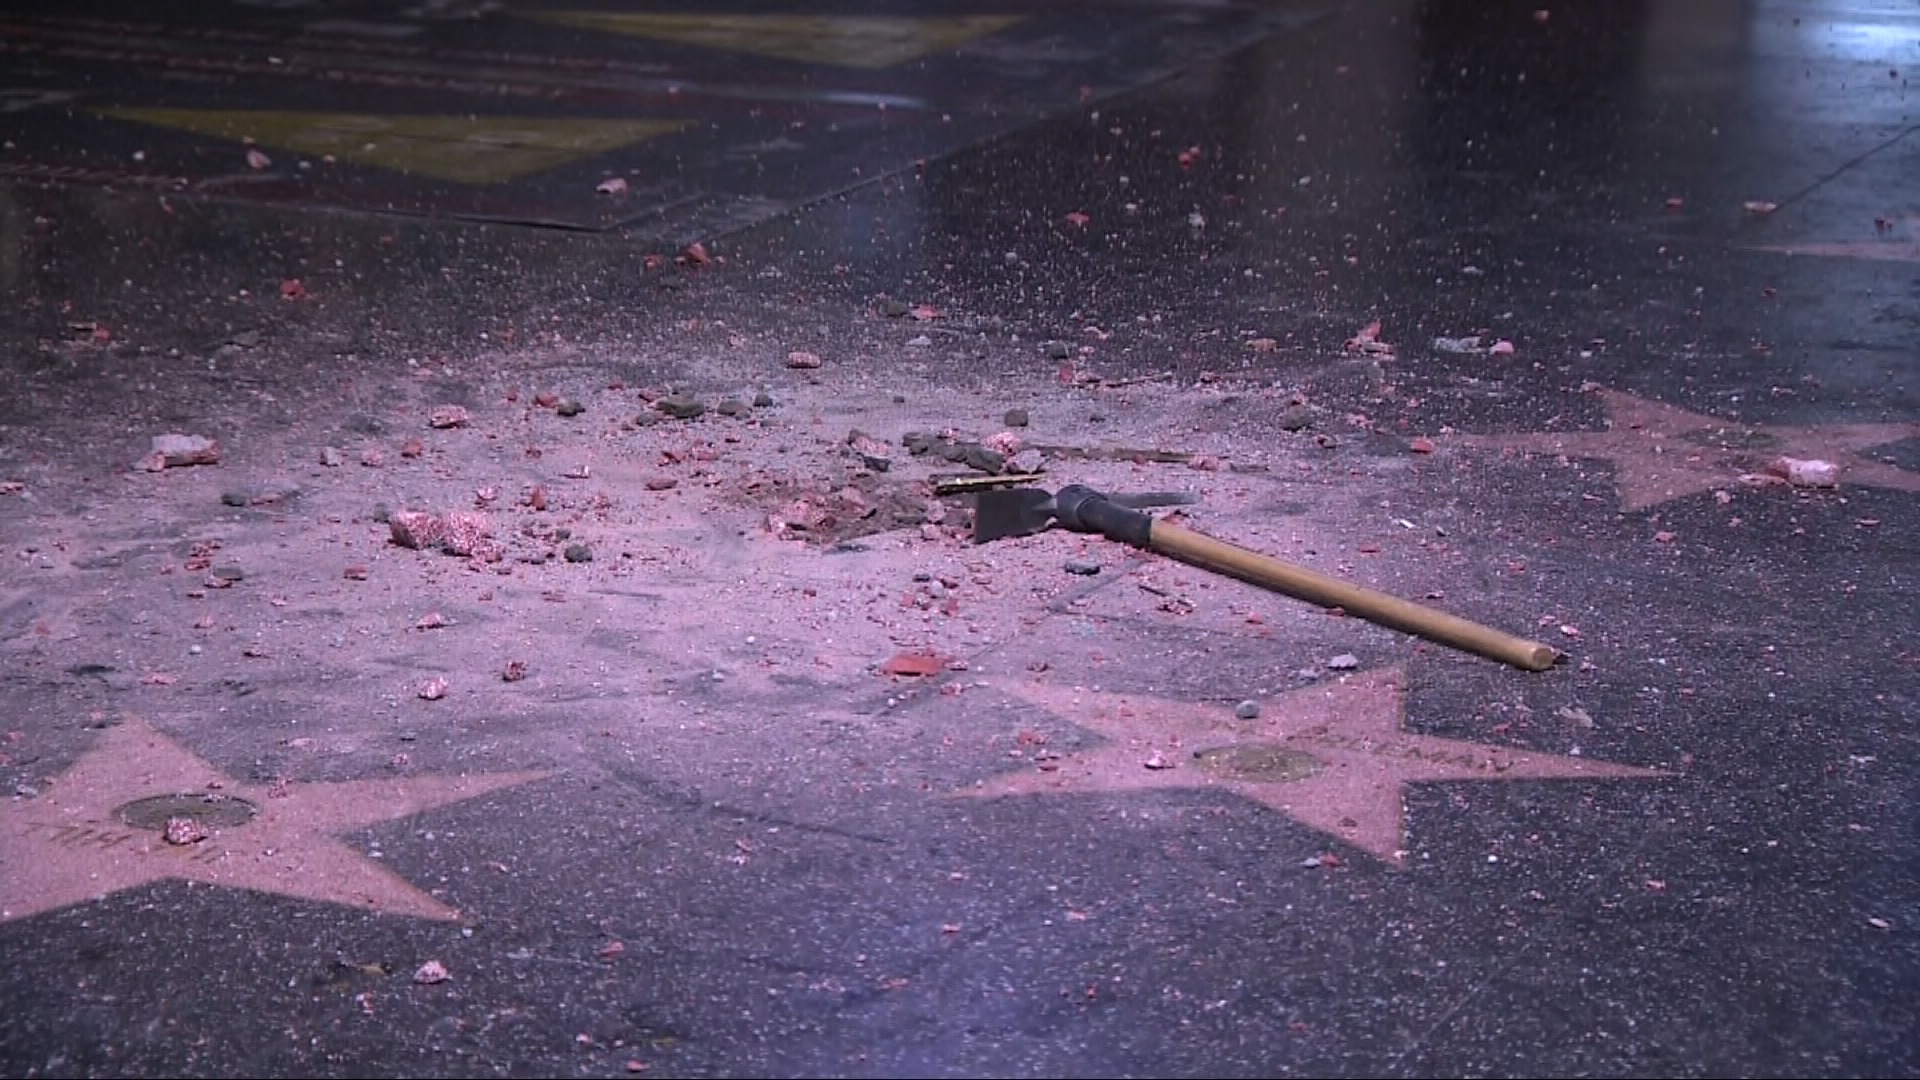 President Trump S Walk Of Fame Star Was Smashed To Pieces Cnn - trump star hollywood brawl